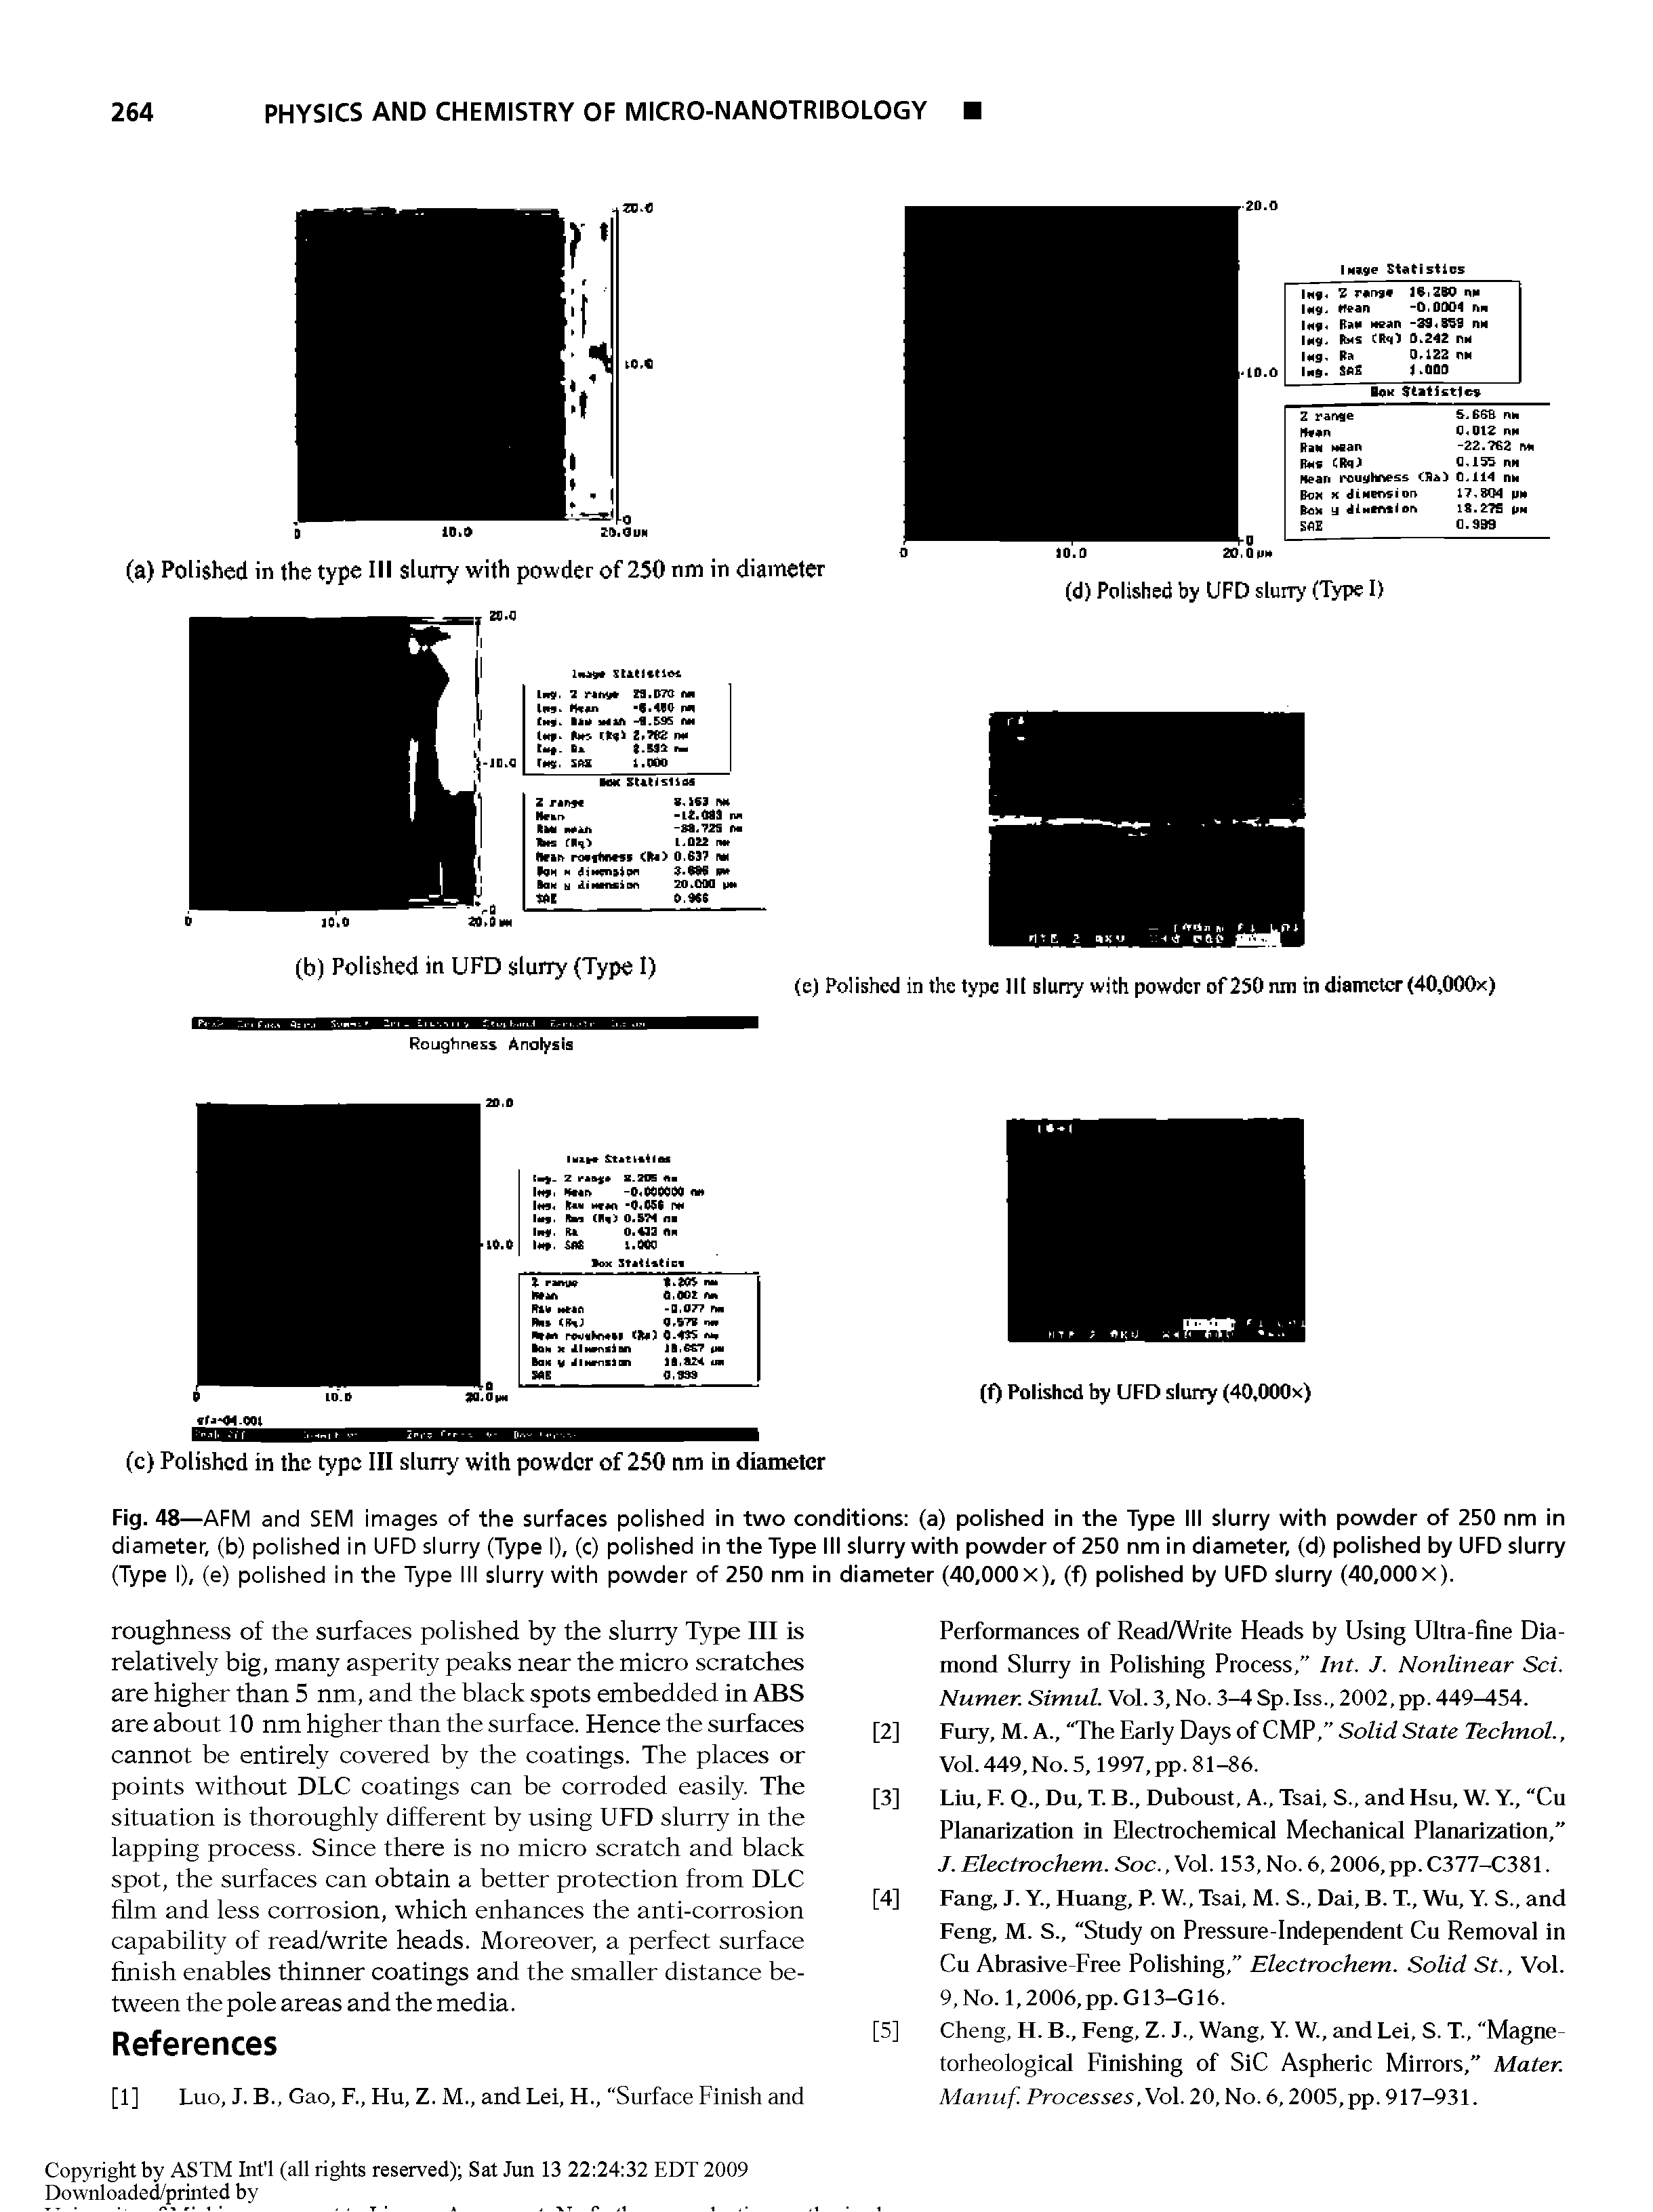 Fig. 48—AFM and SEM images of the surfaces polished in two conditions (a) polished in the Type III slurry with powder of 250 nm in diameter, (b) polished in UFD slurry (Type I), (c) polished in the Type III slurry with powder of 250 nm in diameter, (d) polished by UFD slurry (Type I), (e) polished in the Type III slurry with powder of 250 nm in diameter (40,000x), (f) polished by UFD slurry (40,000x).